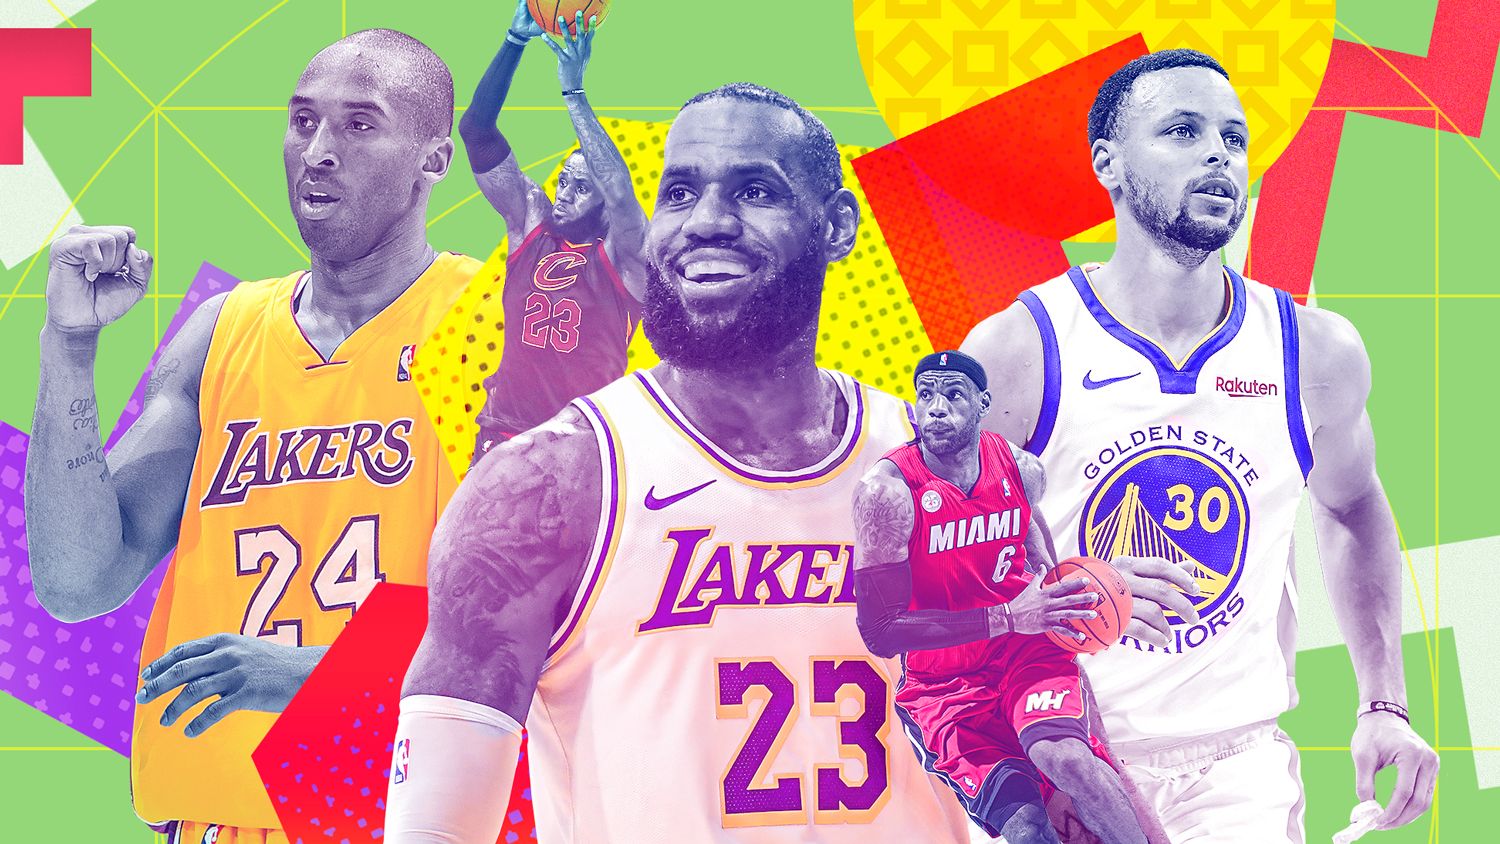 Ranking the top 25 NBA players of the 21st century